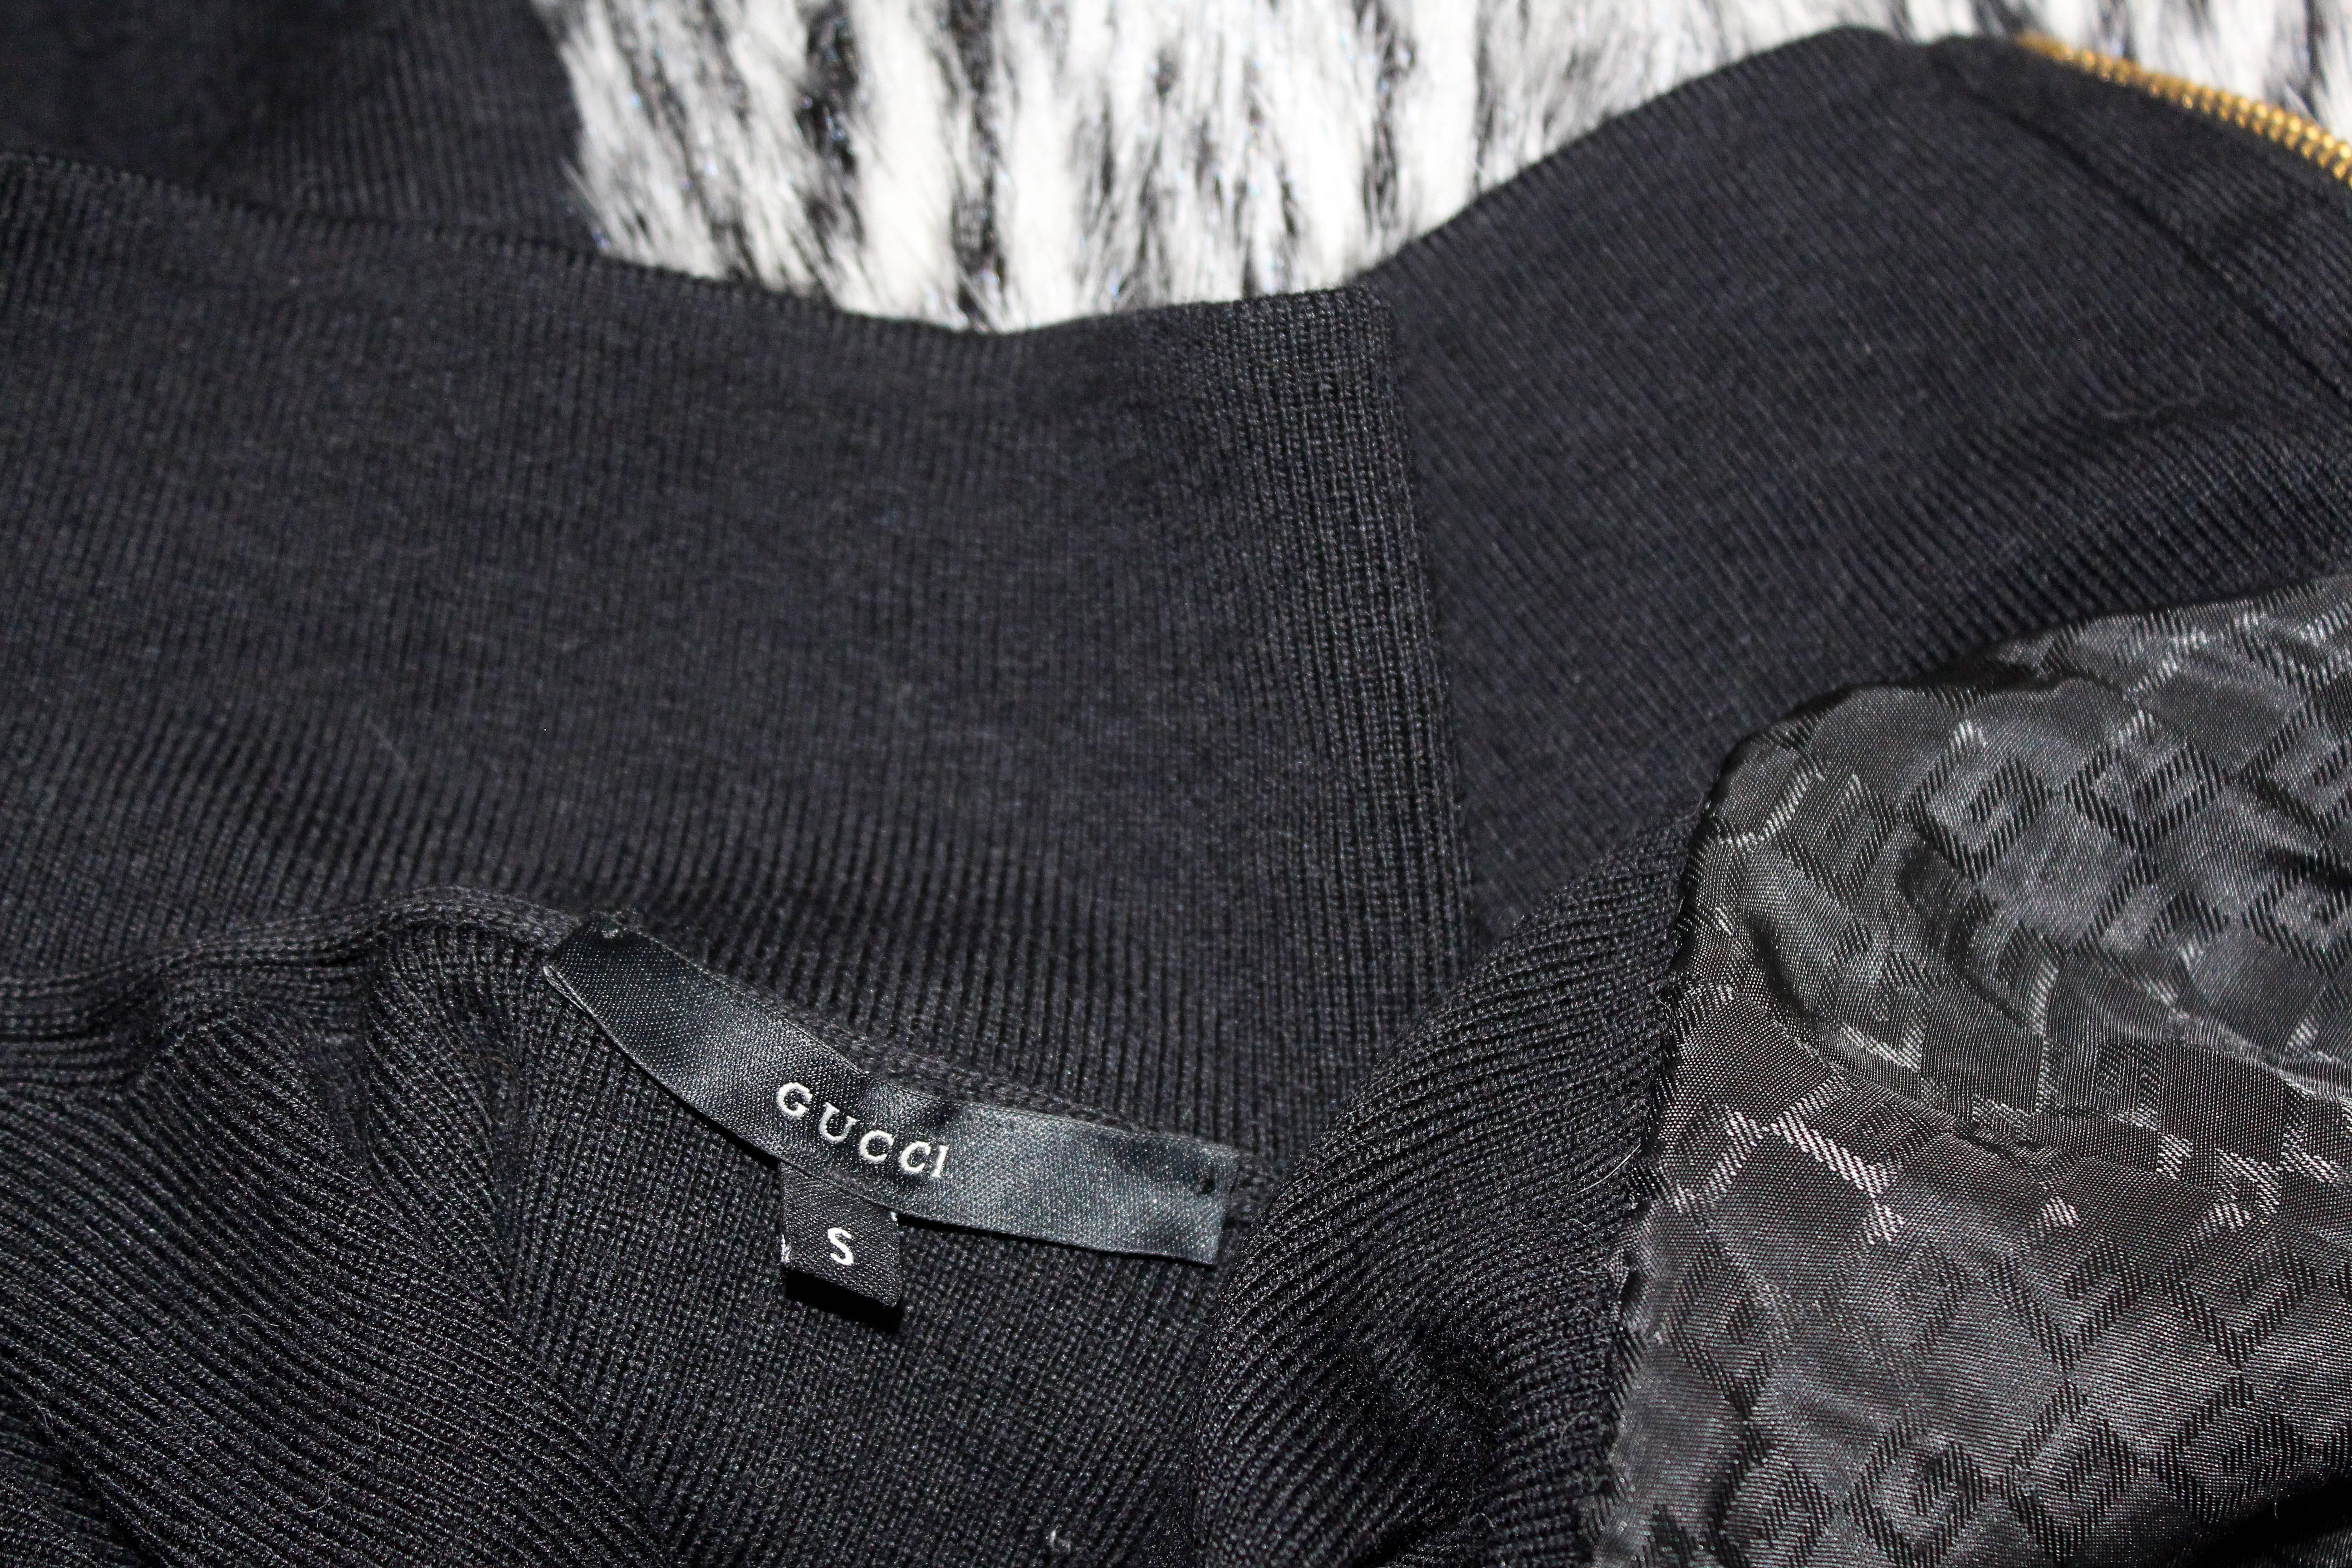 tom ford sweater